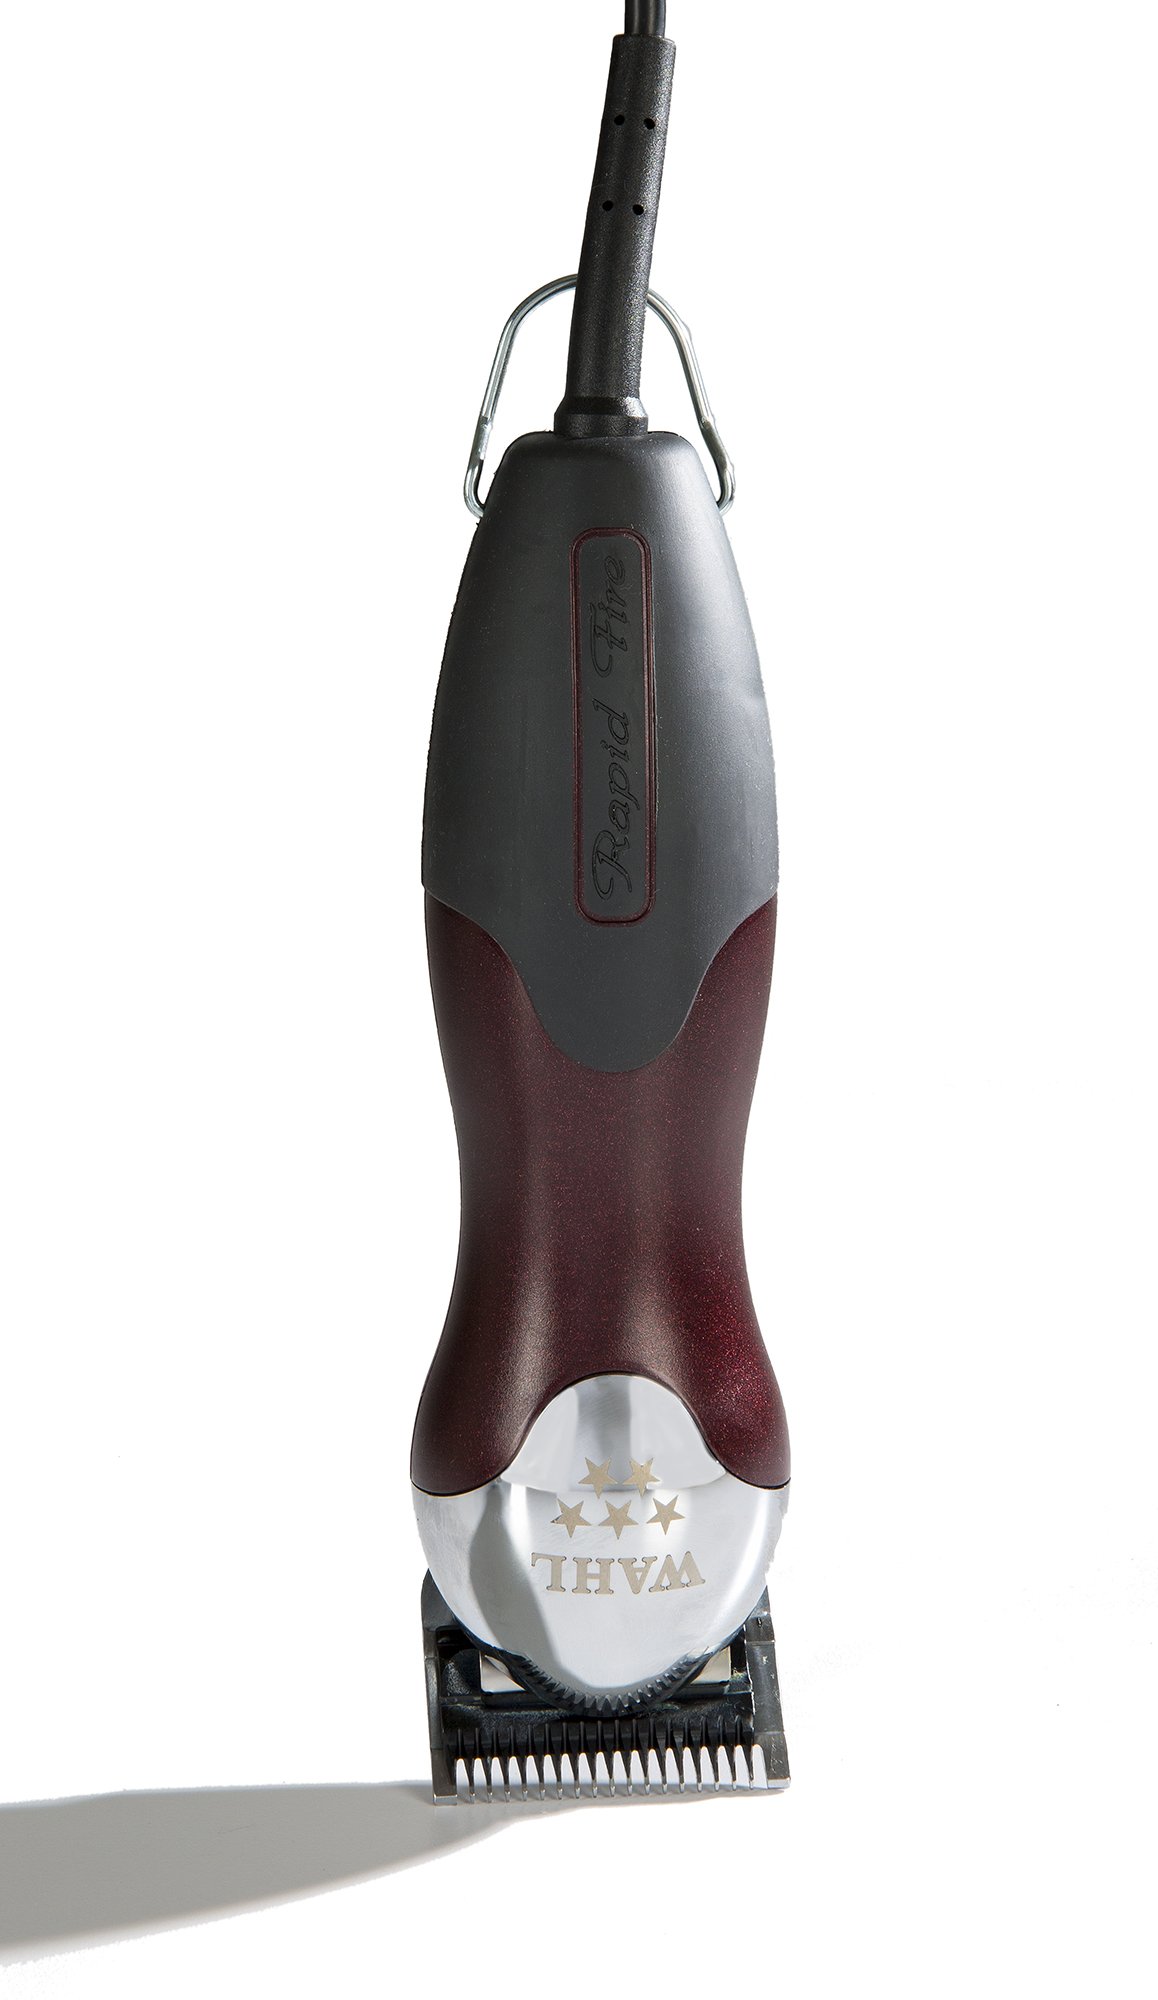 Wahl Professional 5 Star Rapid Fire Clipper for High Precision Cutting with 4 Steel Blade Extenders for Professional Barbers and Stylists – Model 8233-200